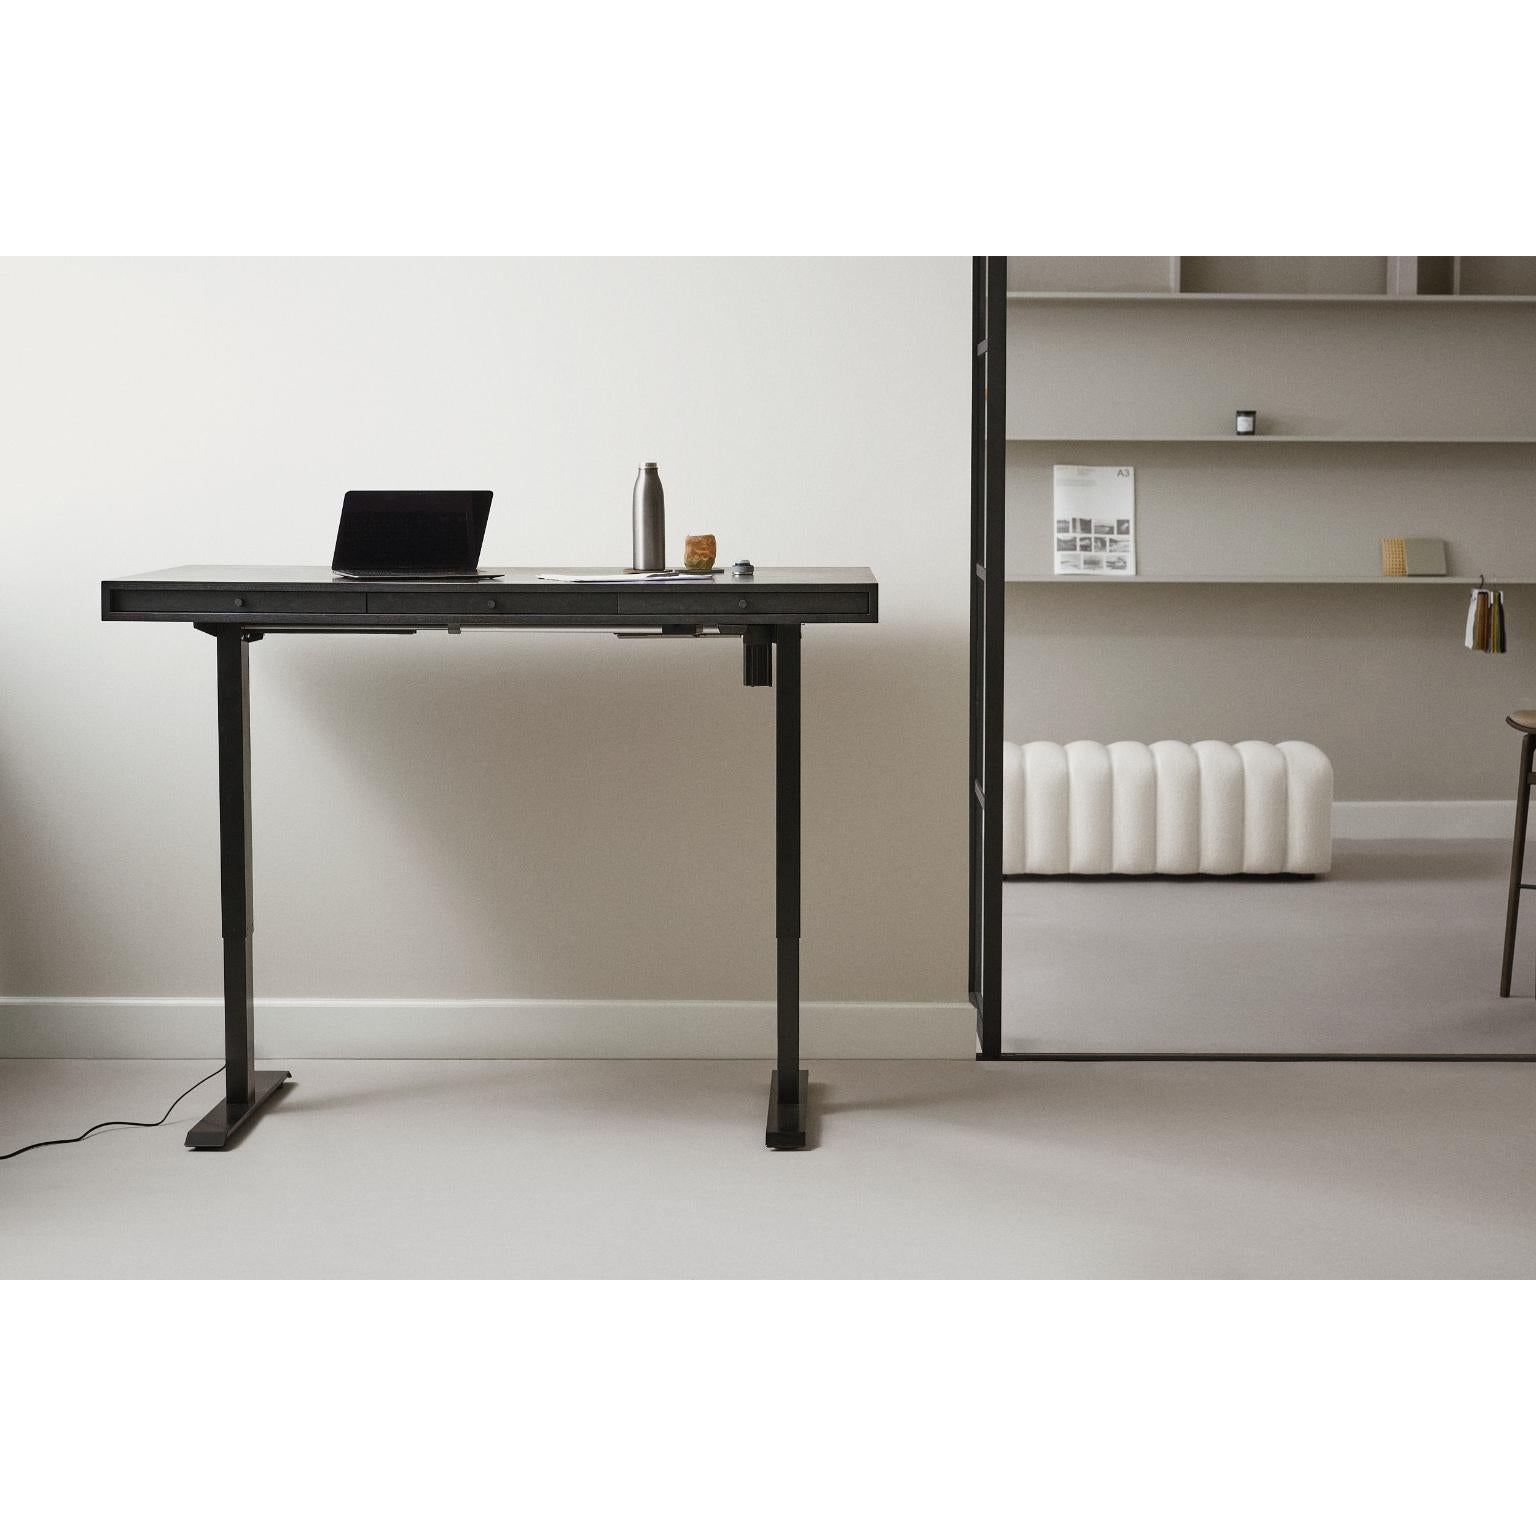 Danish JFK Home Desk With Adjustable Height Legs by NORR11